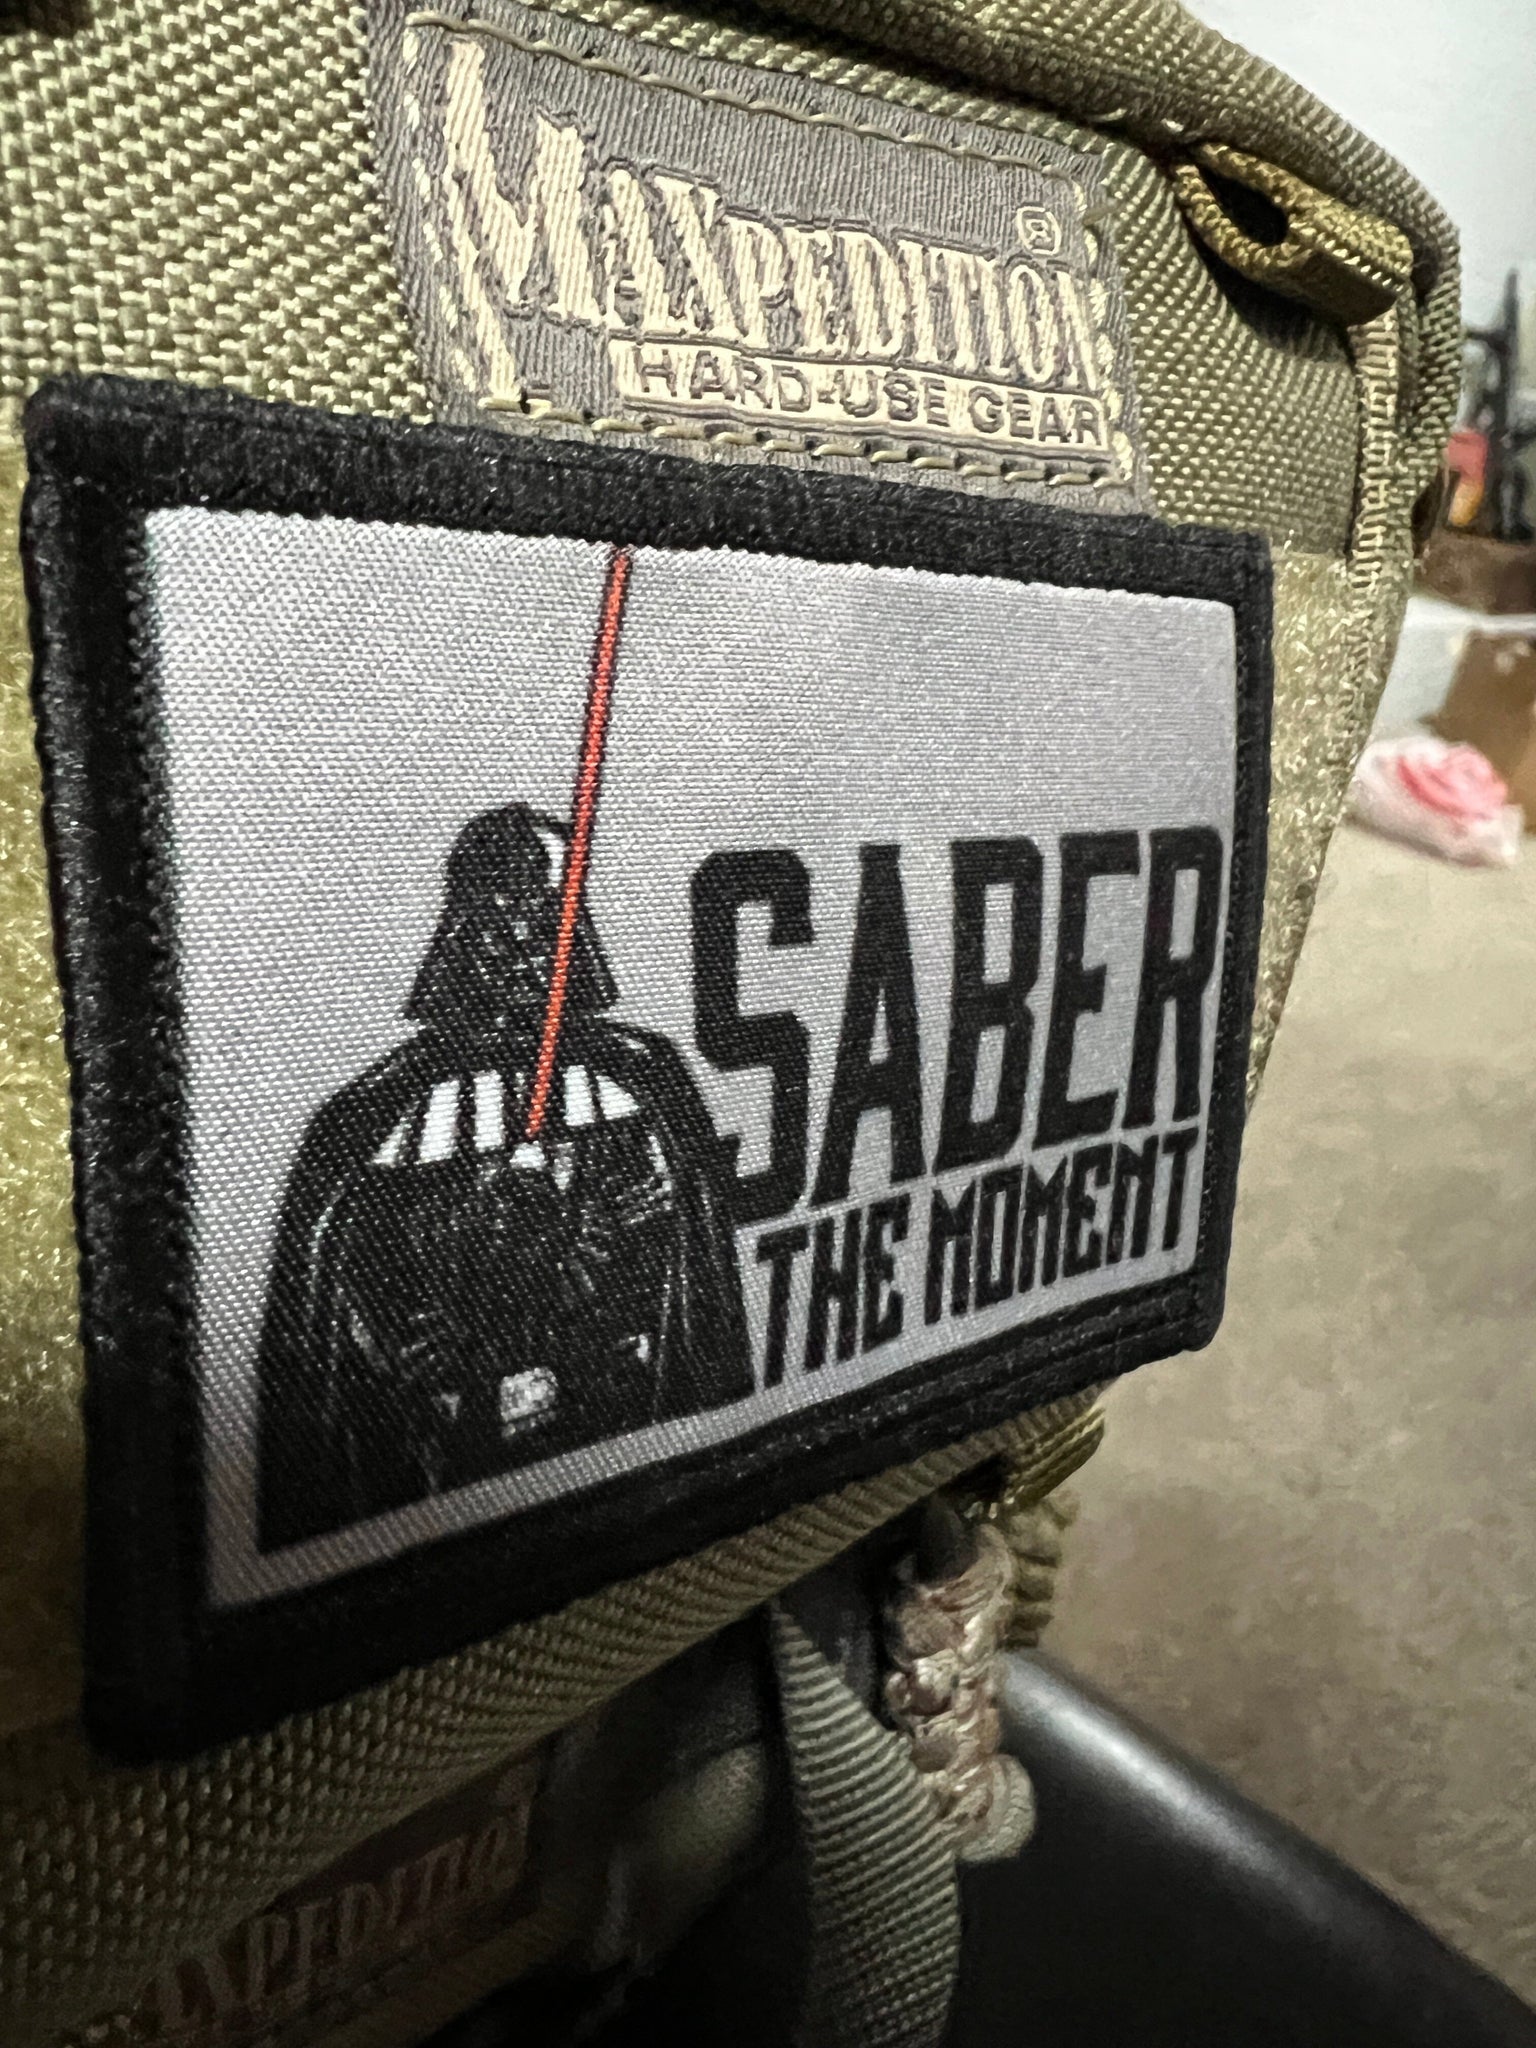 Star Wars Bed Sheets Morale Patch